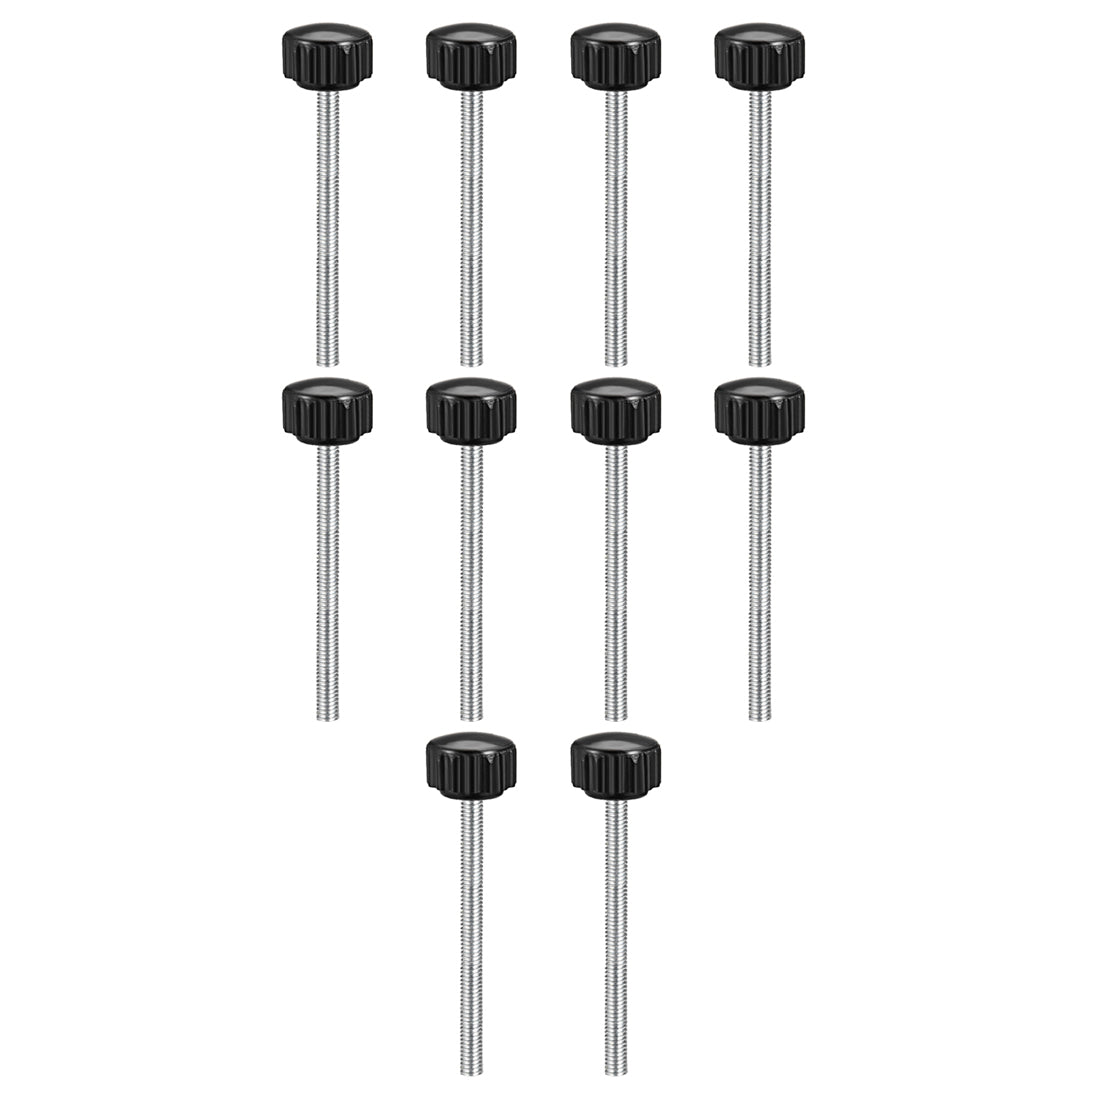 Uxcell Uxcell M5 x 15mm Male Thread Knurled Clamp Knobs Grip Thumb Screw on Type Round Head 10 Pcs